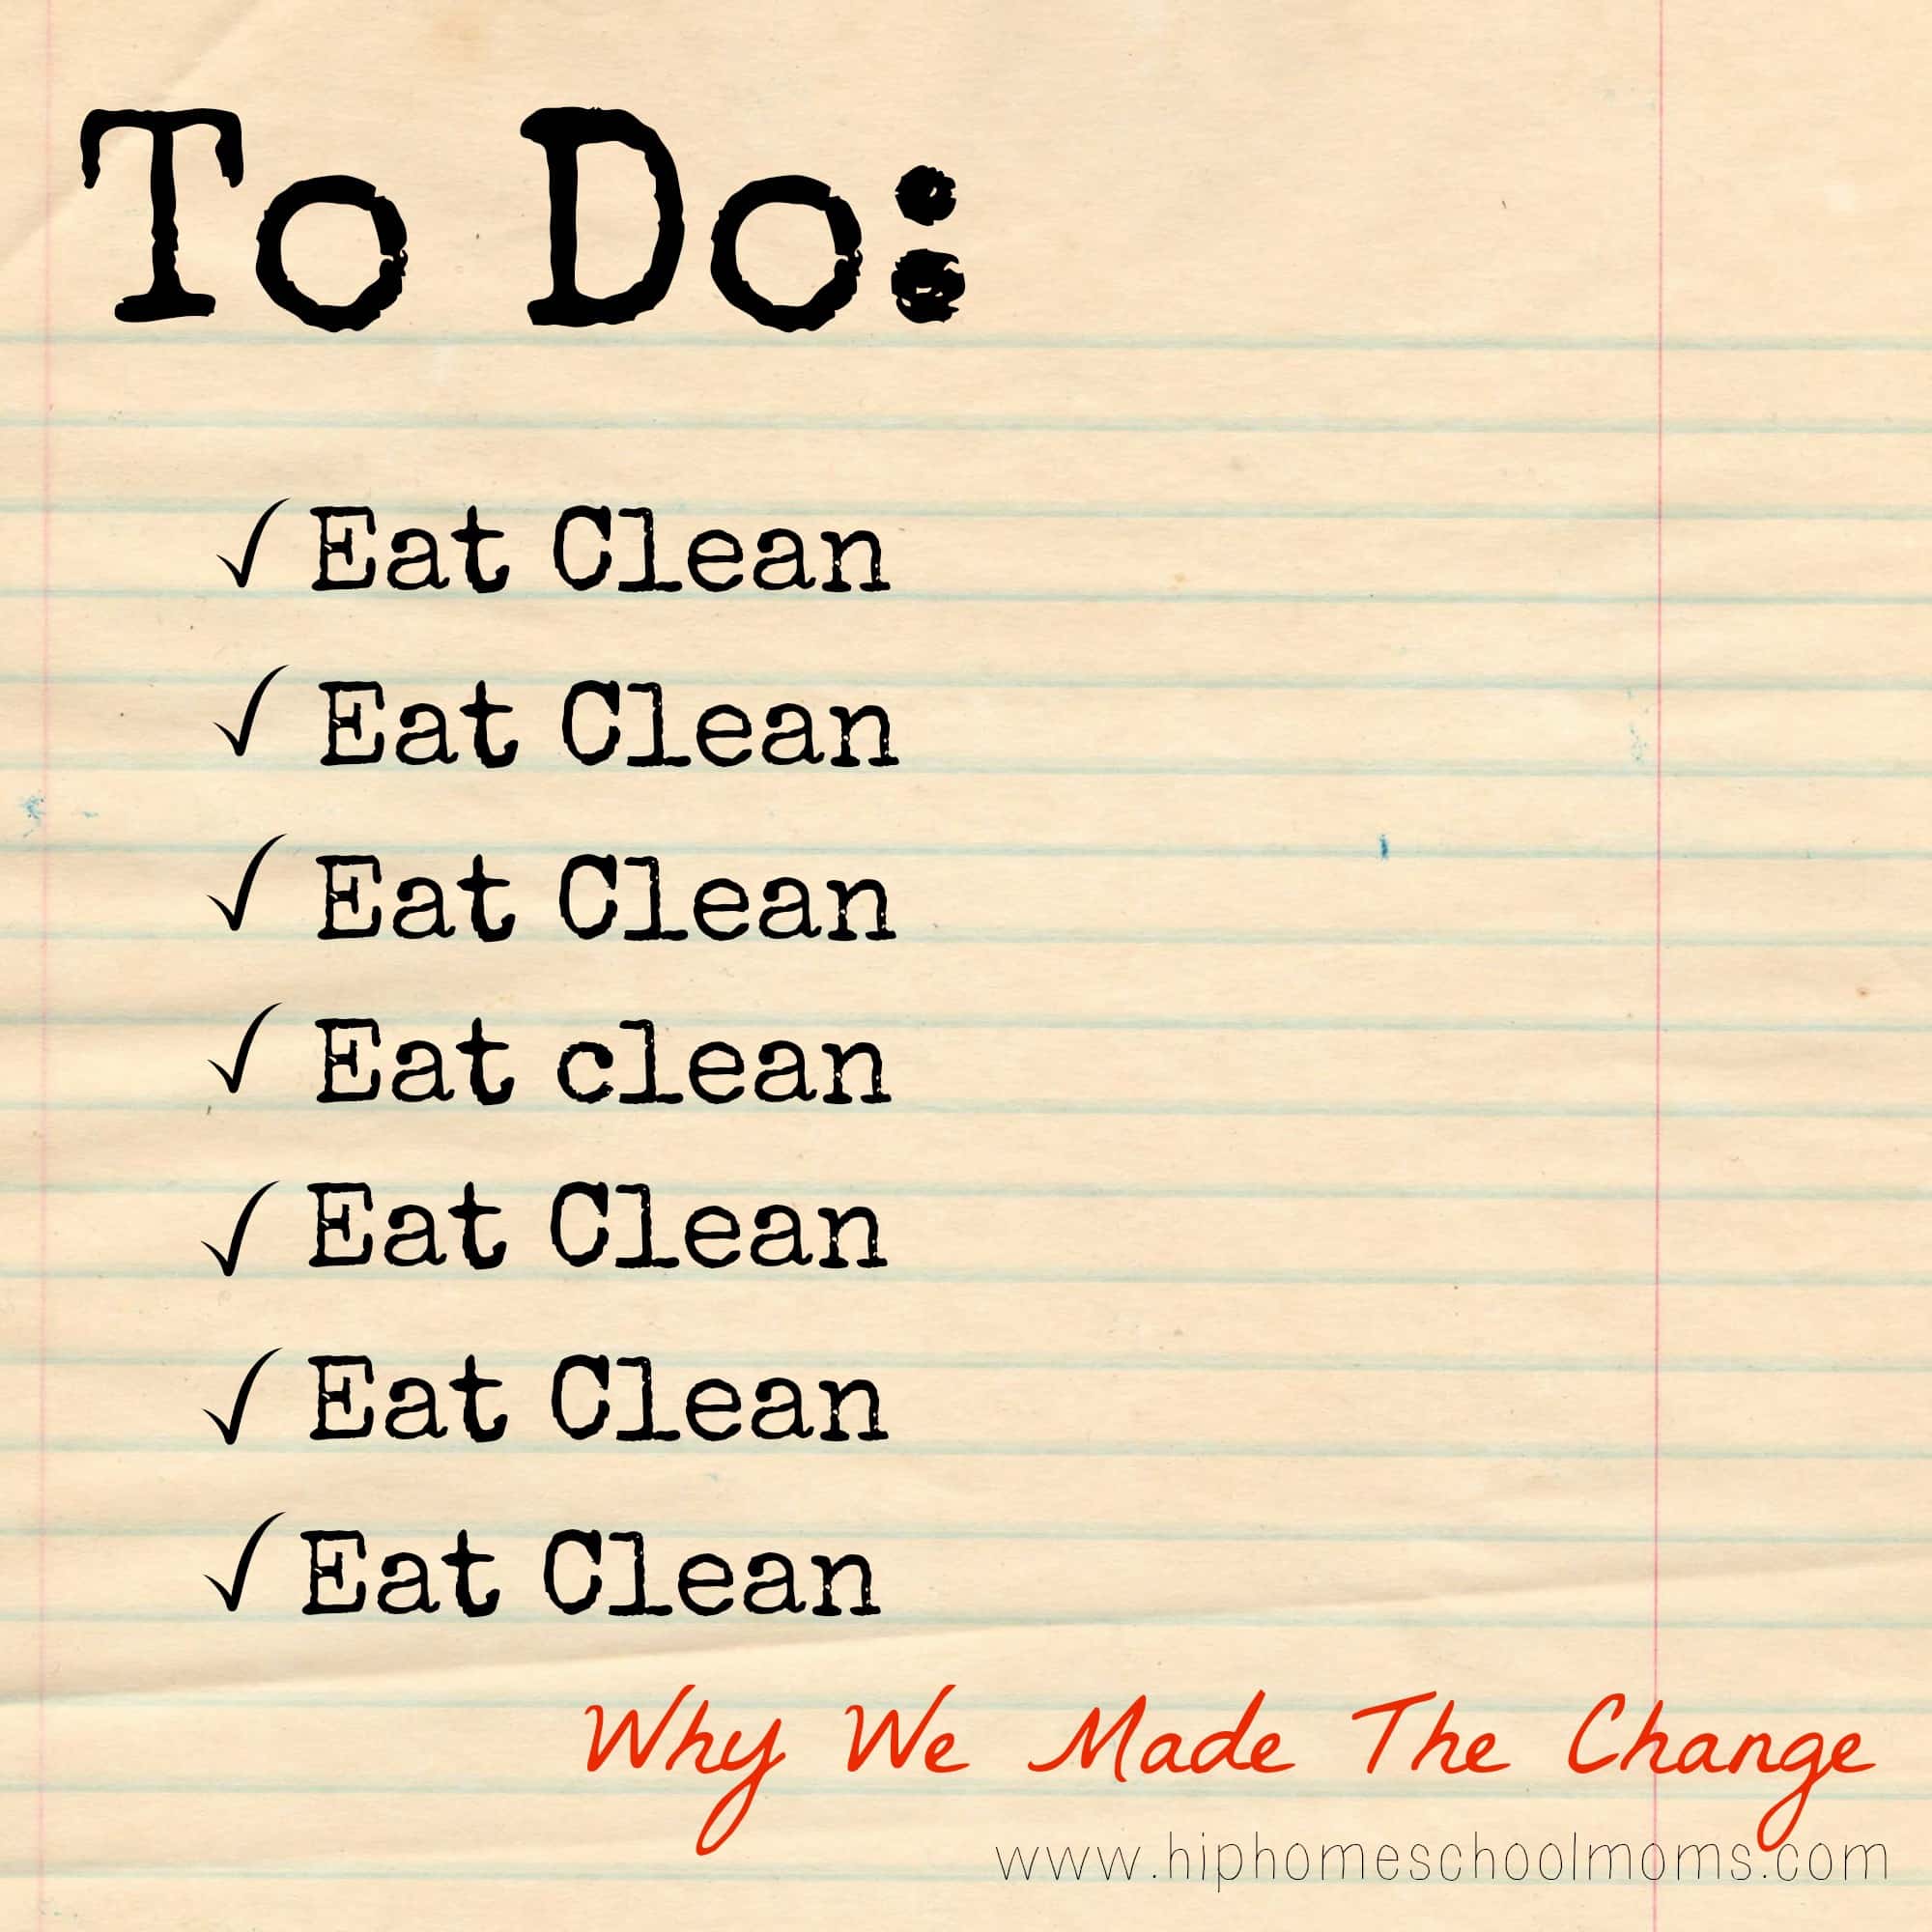 Clean Eating. Why We Made the Change.